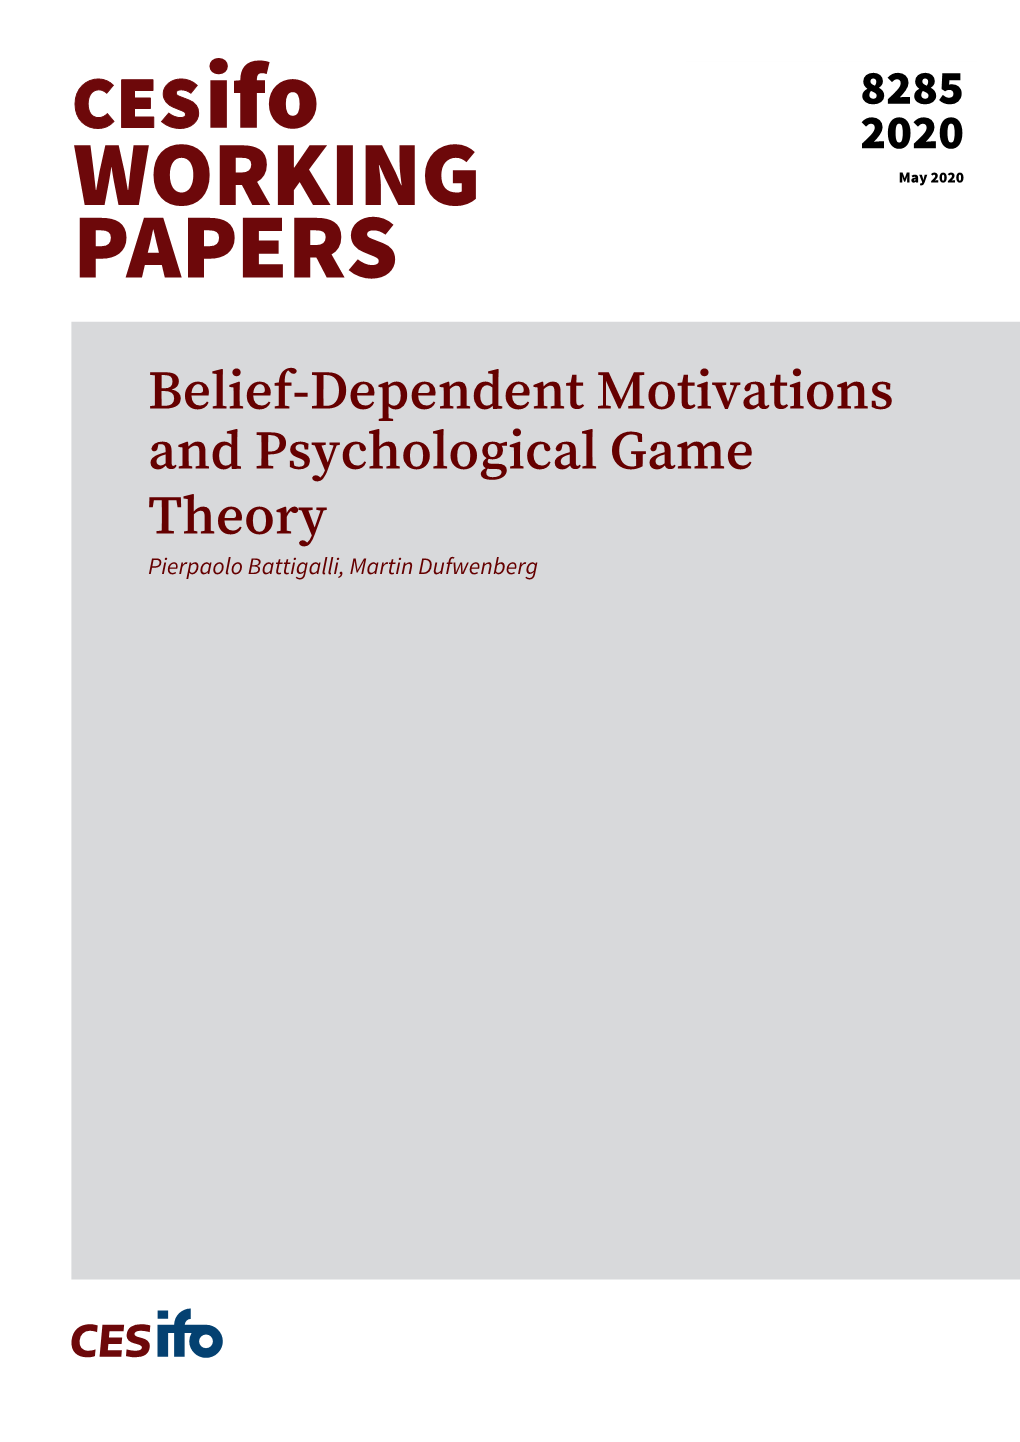 Belief-Dependent Motivations and Psychological Game Theory Pierpaolo Battigalli, Martin Dufwenberg Impressum